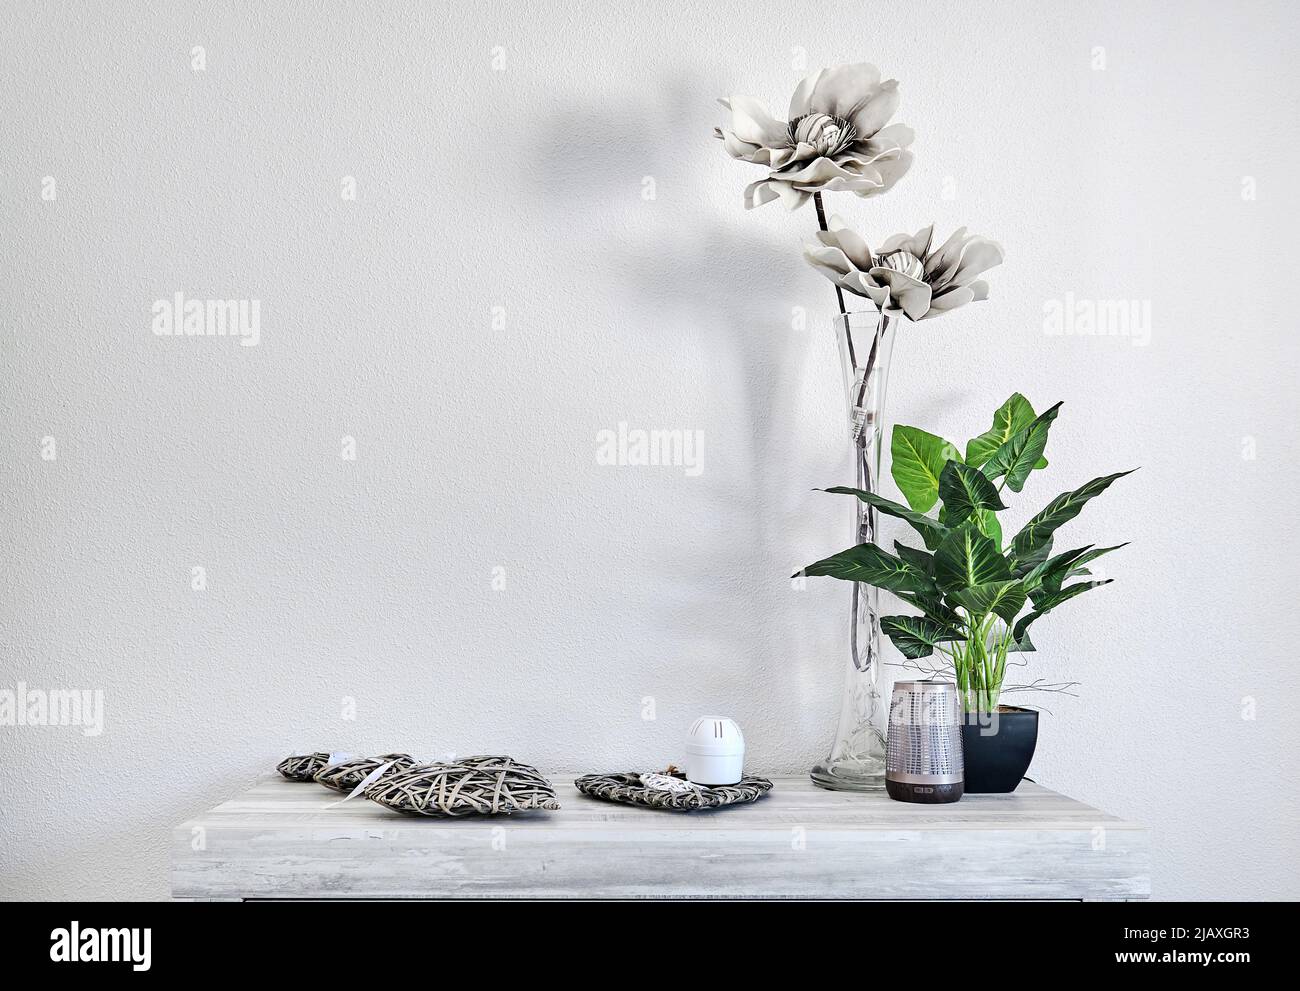 Potted green natural and grey artificial flowers in vase with cute home accessories on table over white wall background, copy space Interior Stock Photo